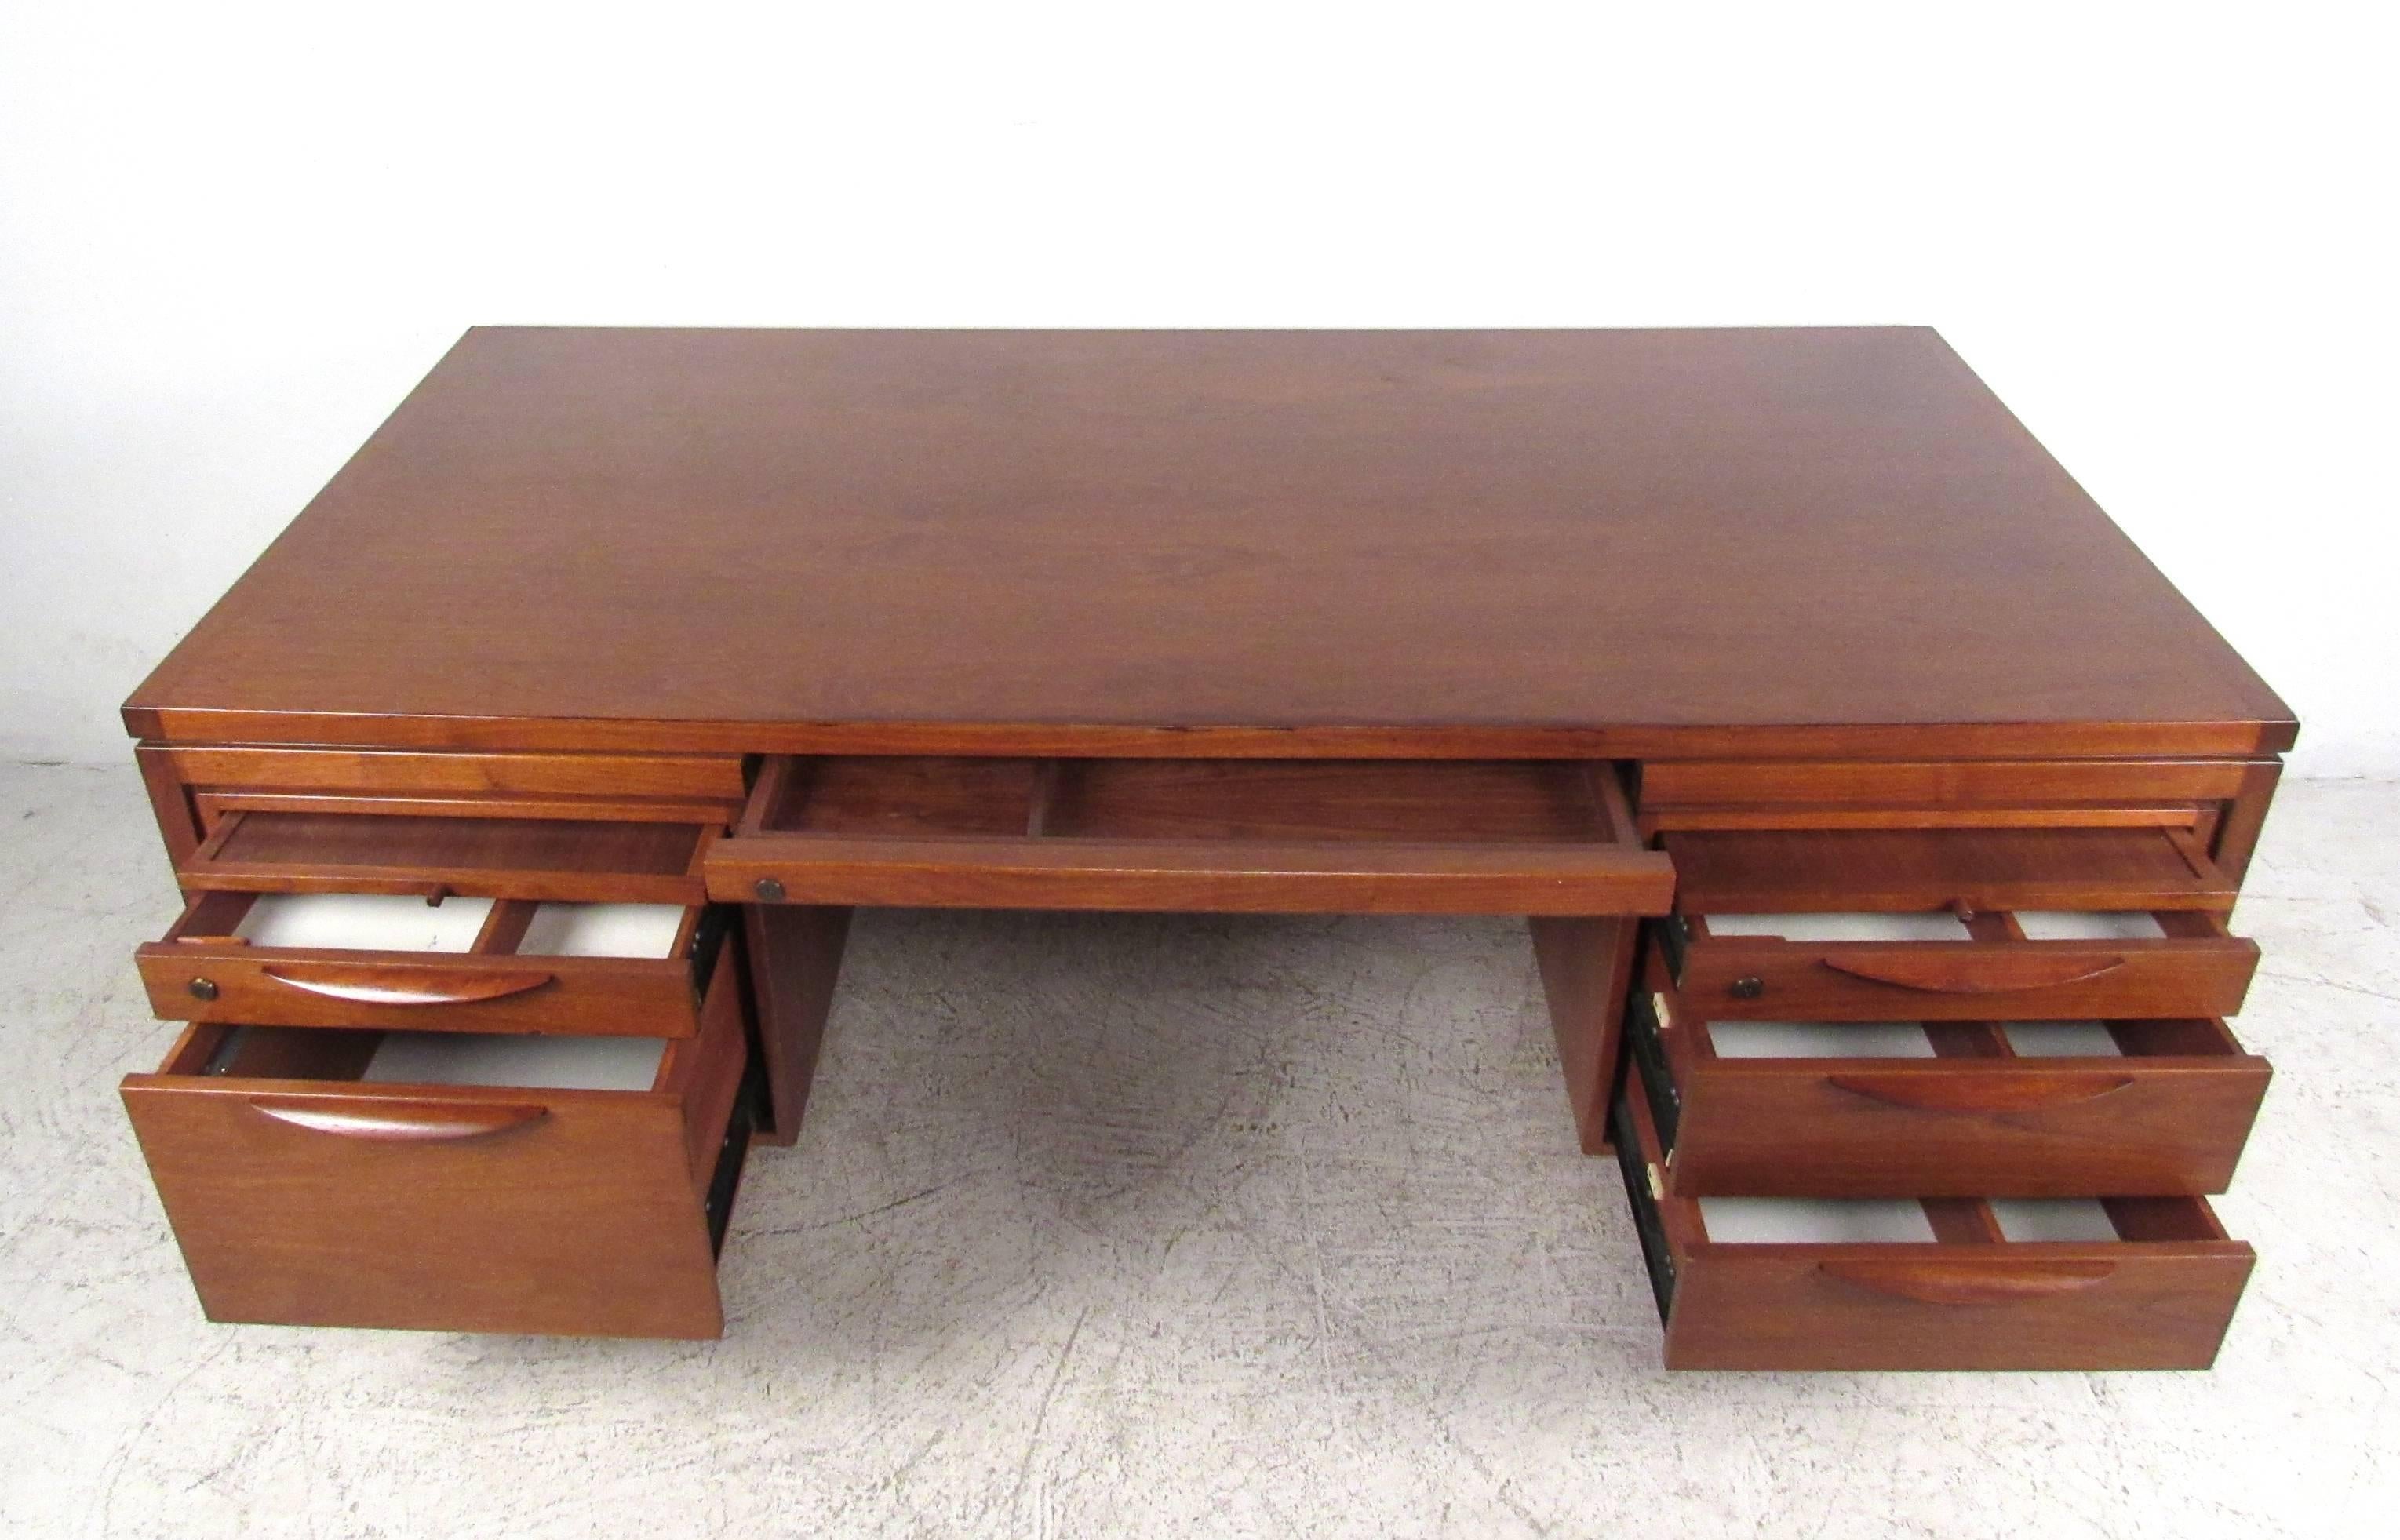 This stunning Mid-Century desk features the quality vintage construction Jens Risom is so well-known for, while offering plenty of organizational and storage options. Carved drawer pulls, extra pull-out work space and it's unique lines make this the